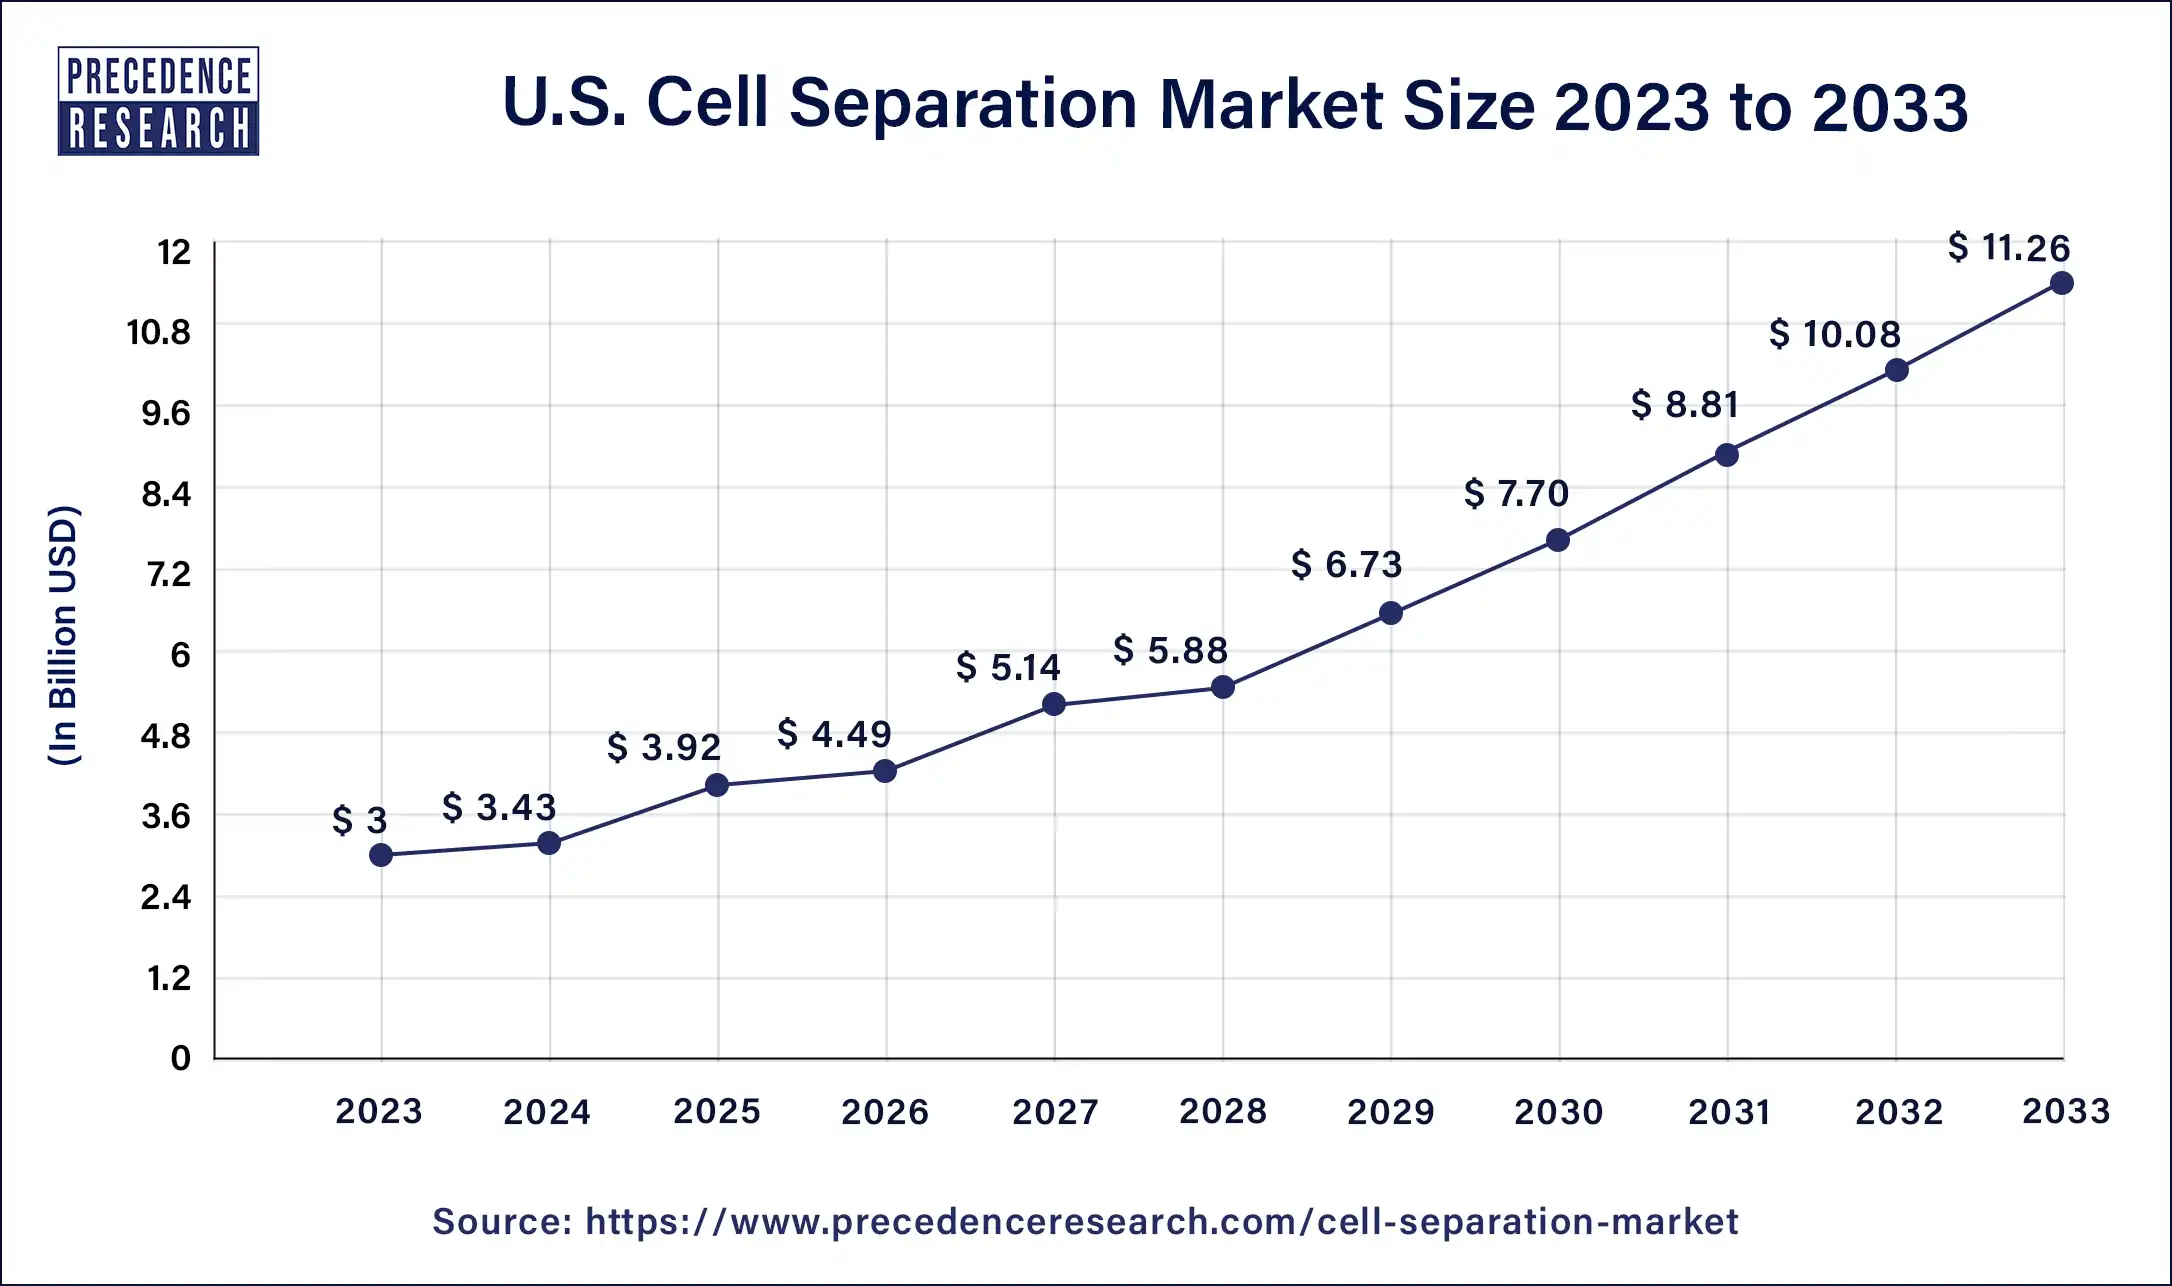 U.S. Cell Separation Market Size 2024 to 2033